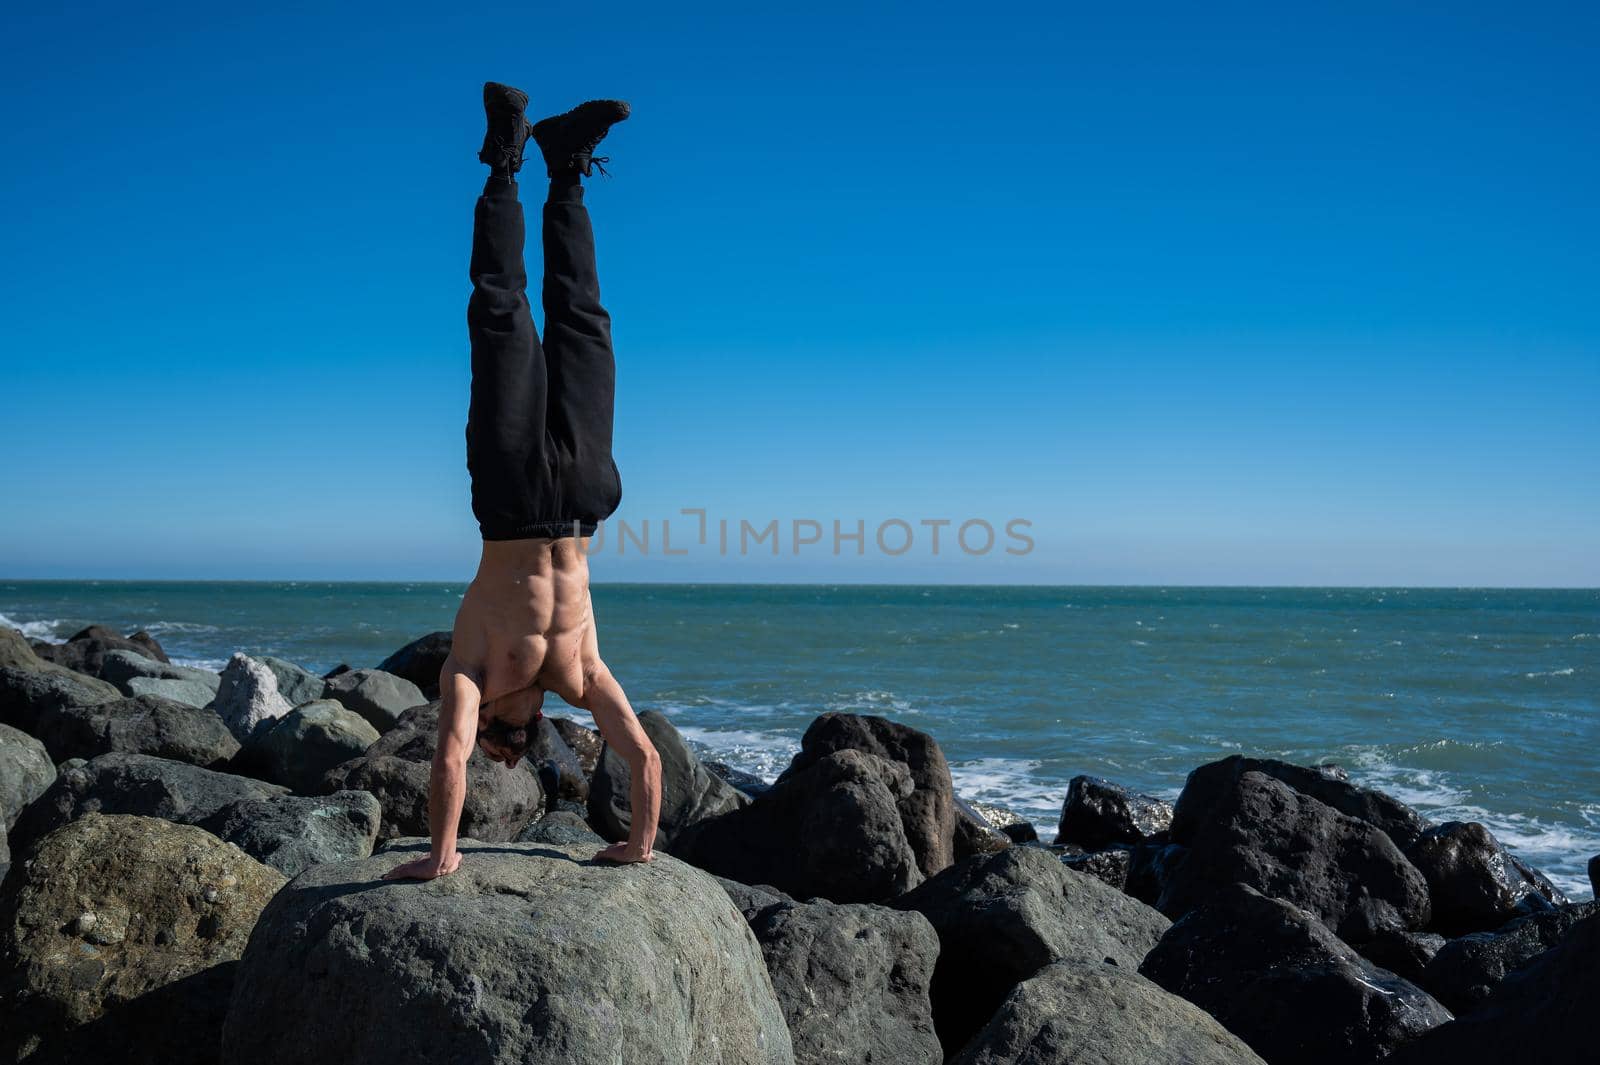 Shirtless man doing handstand on rocks by the sea. by mrwed54